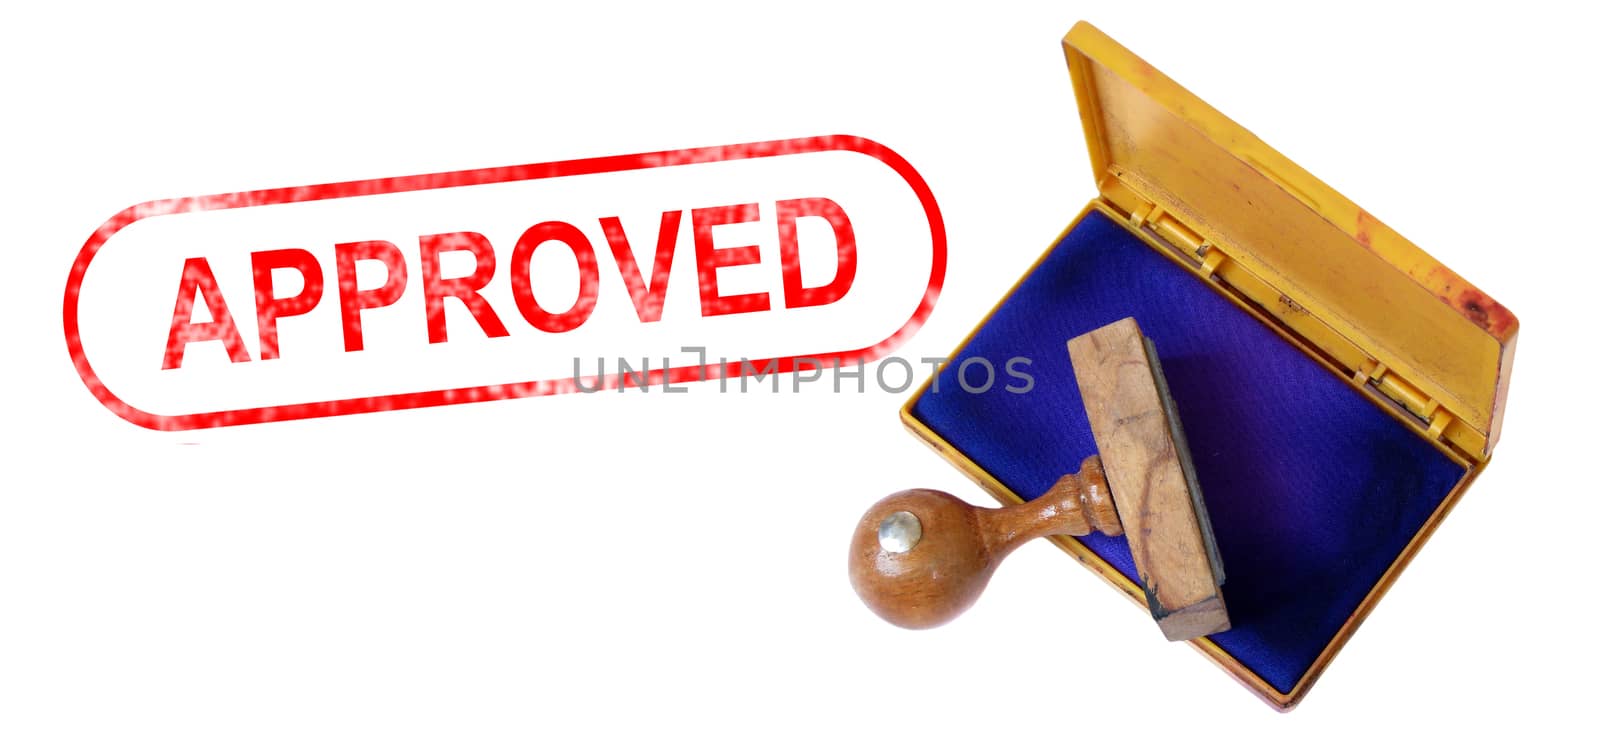 Top view of a rubber stamp with a giant word "APPROVED" printed, isolated on white background.